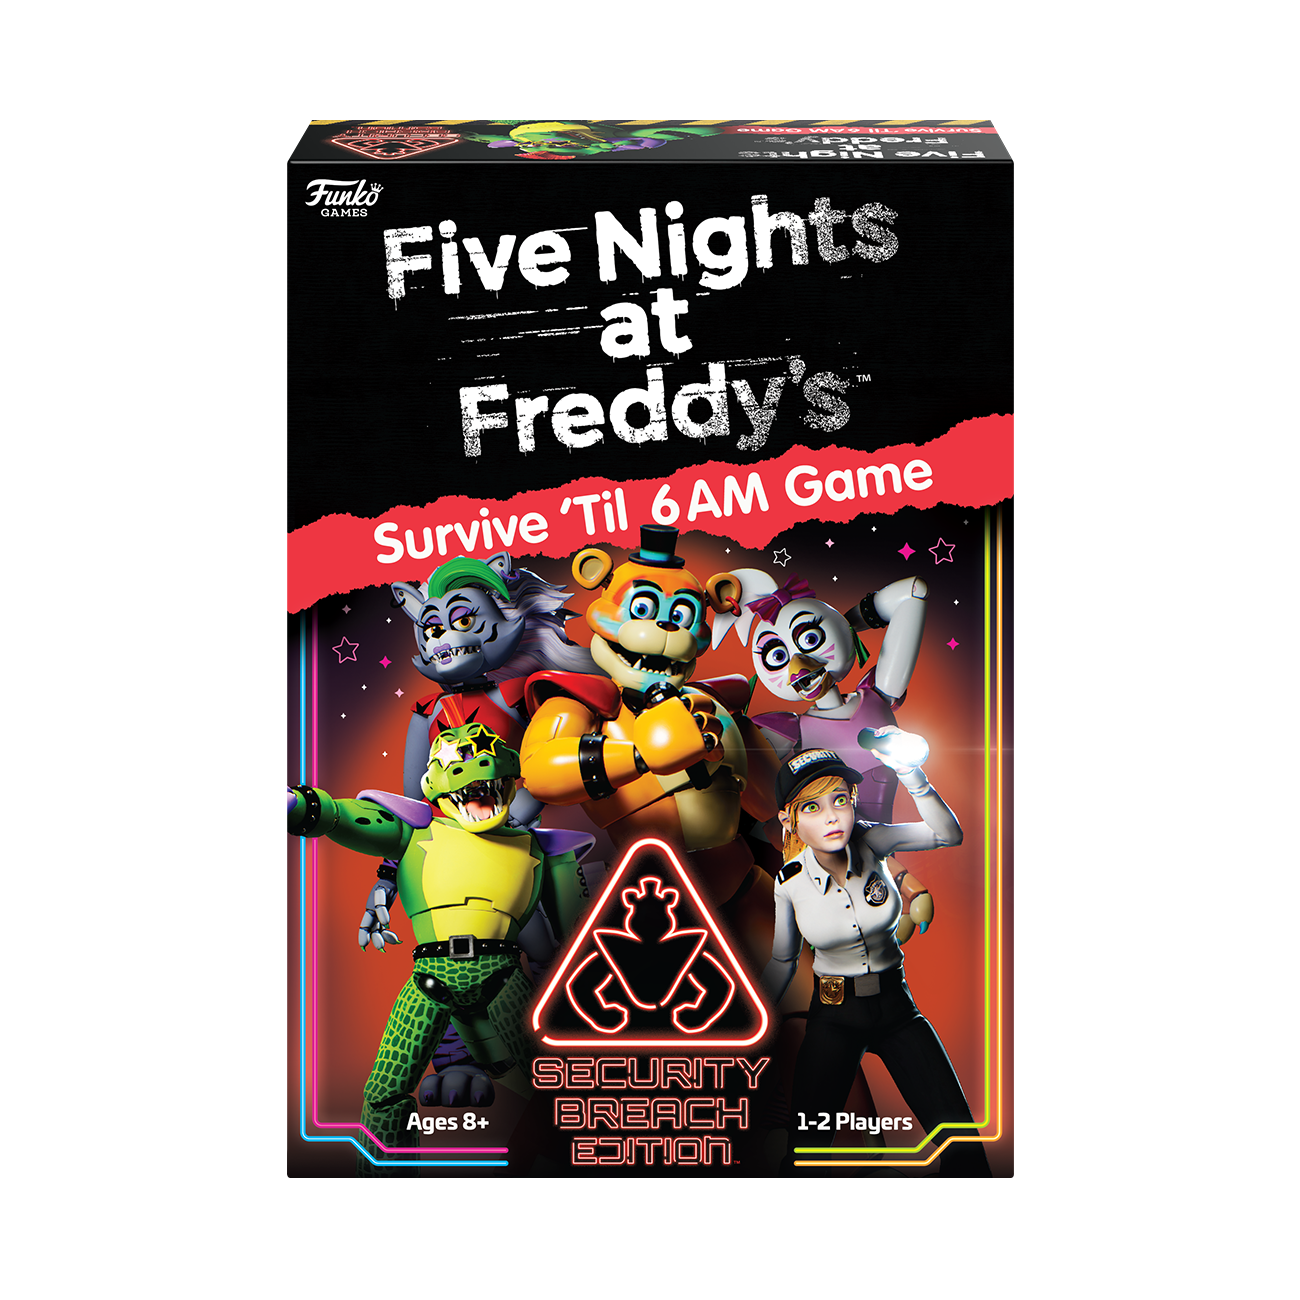 Five Nights at Freddy's in Shop by Video Game